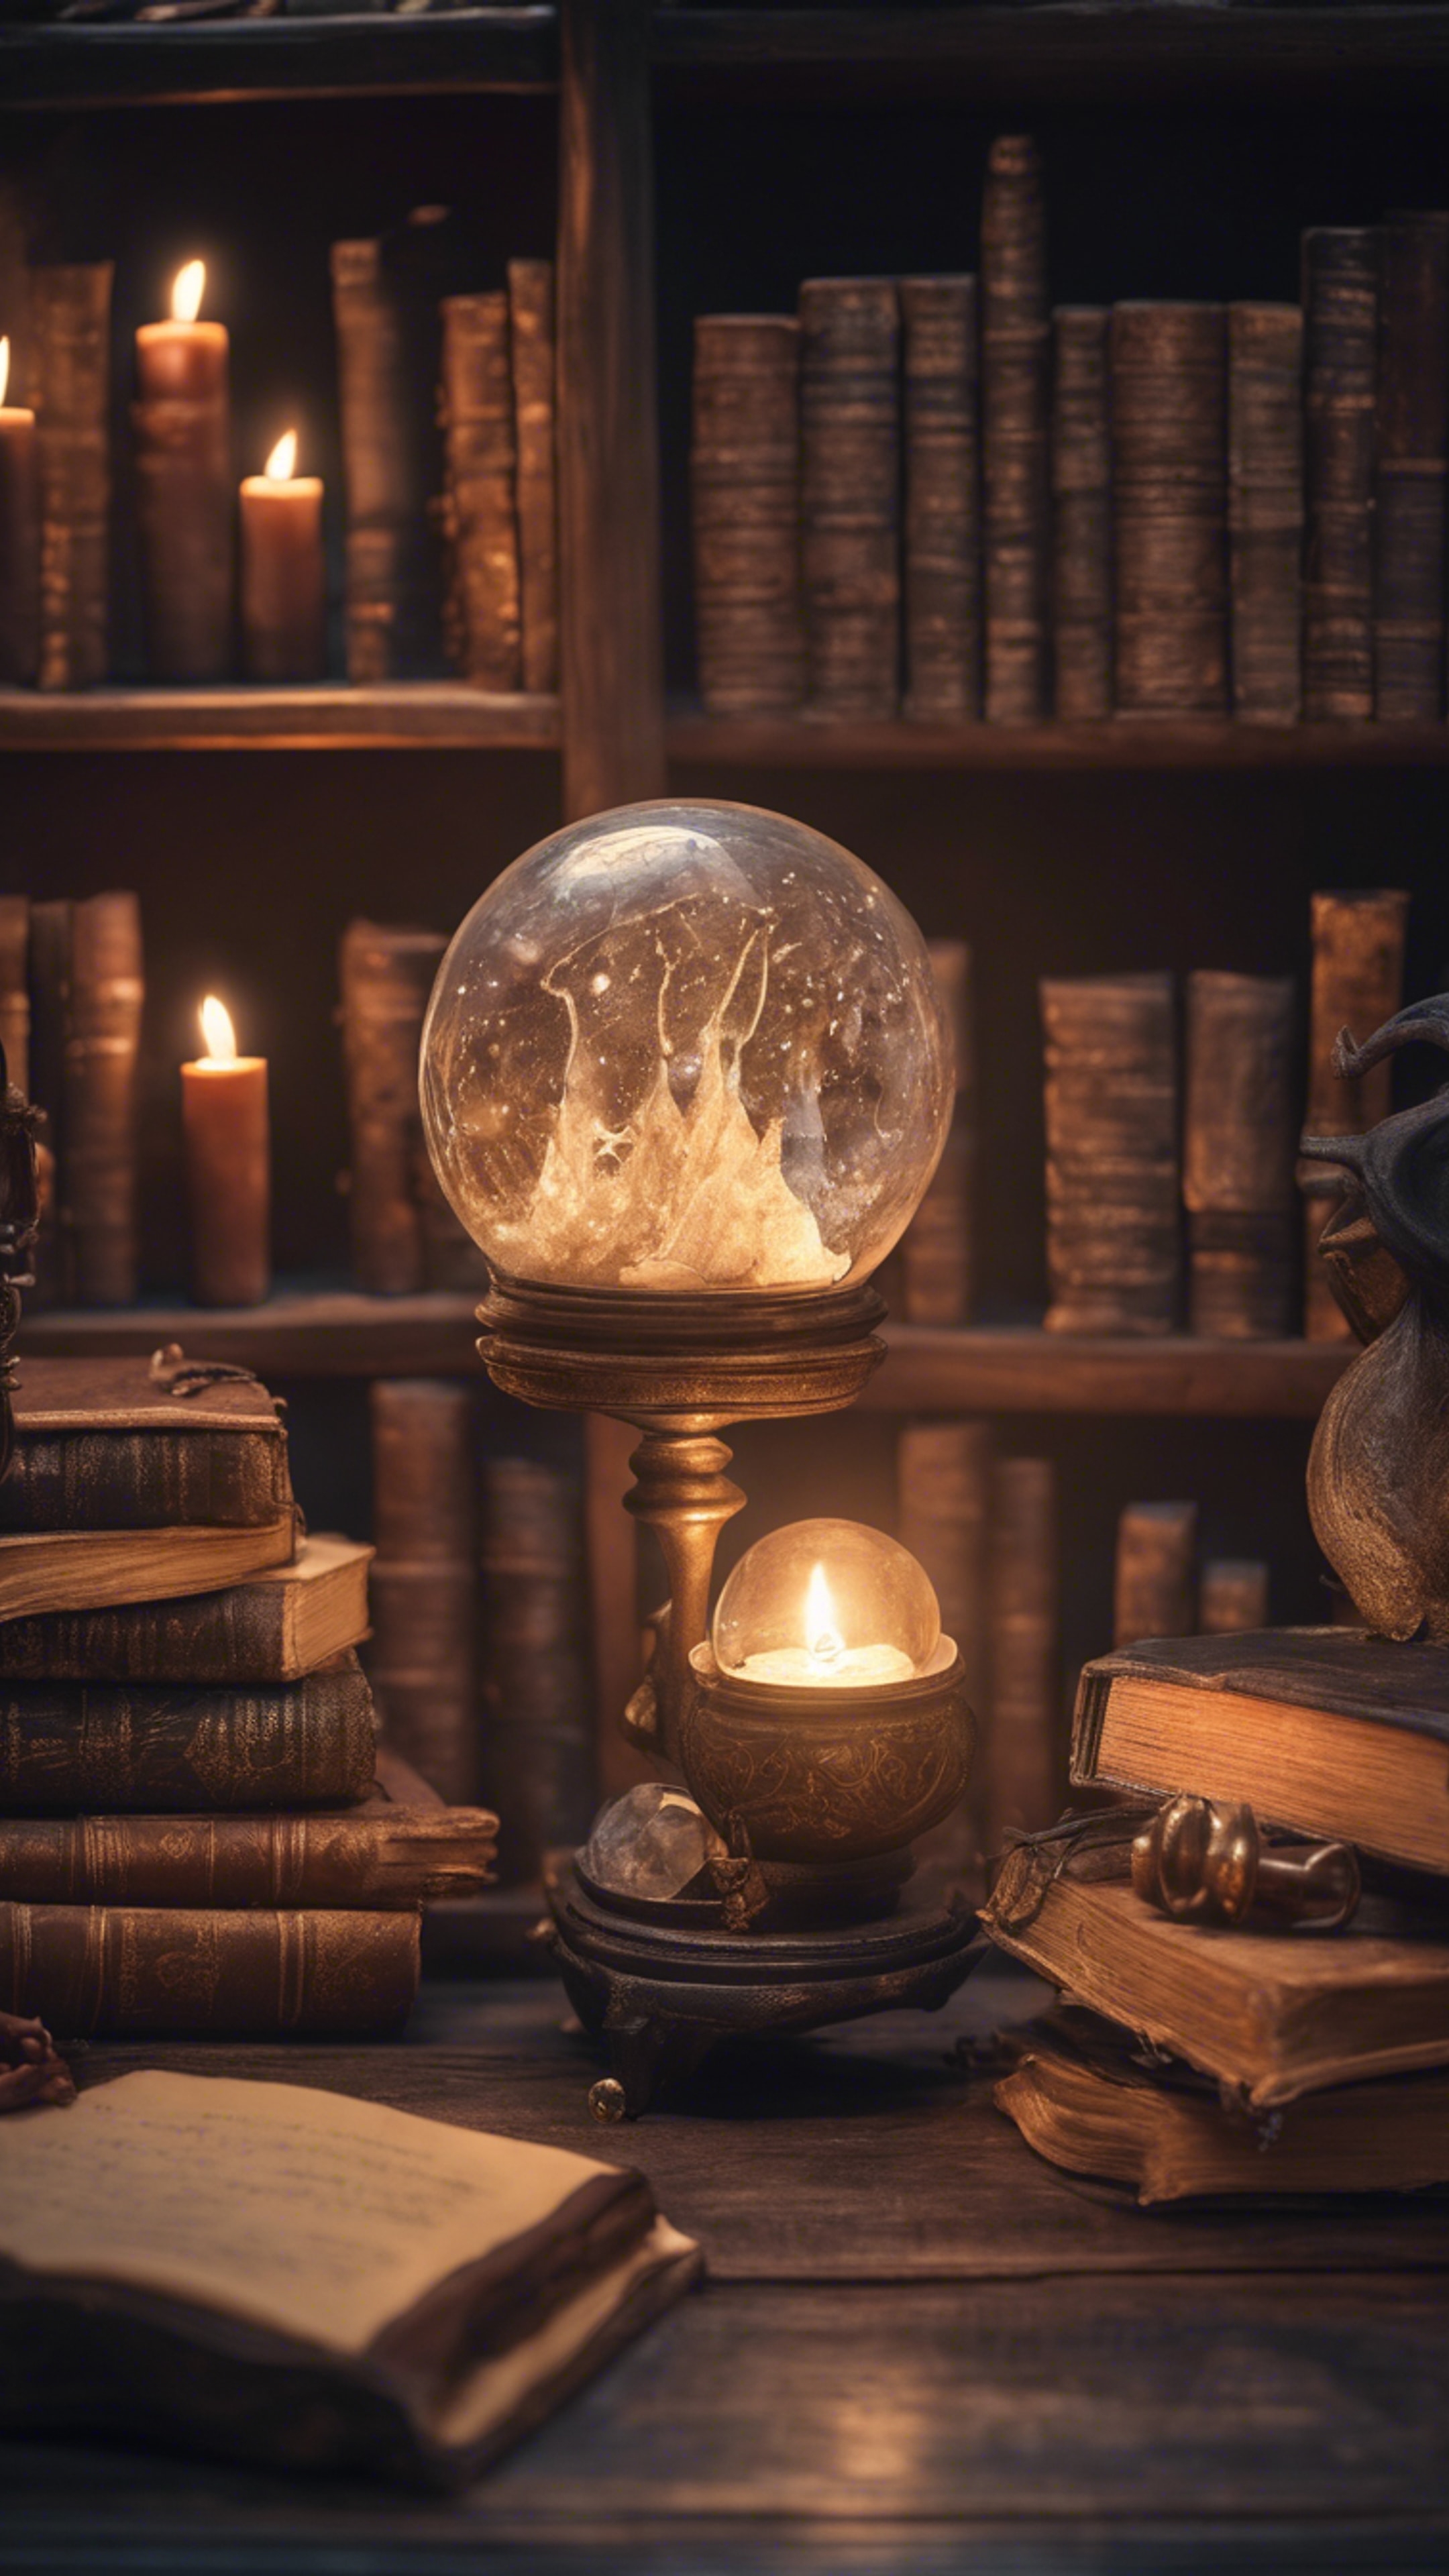 A cozy mystical scene with a wizard’s study room - magical artifacts, rows of spell books, a crystal ball, and a cauldron brewing a potion. Ფონი[df00e949c5584759a81e]